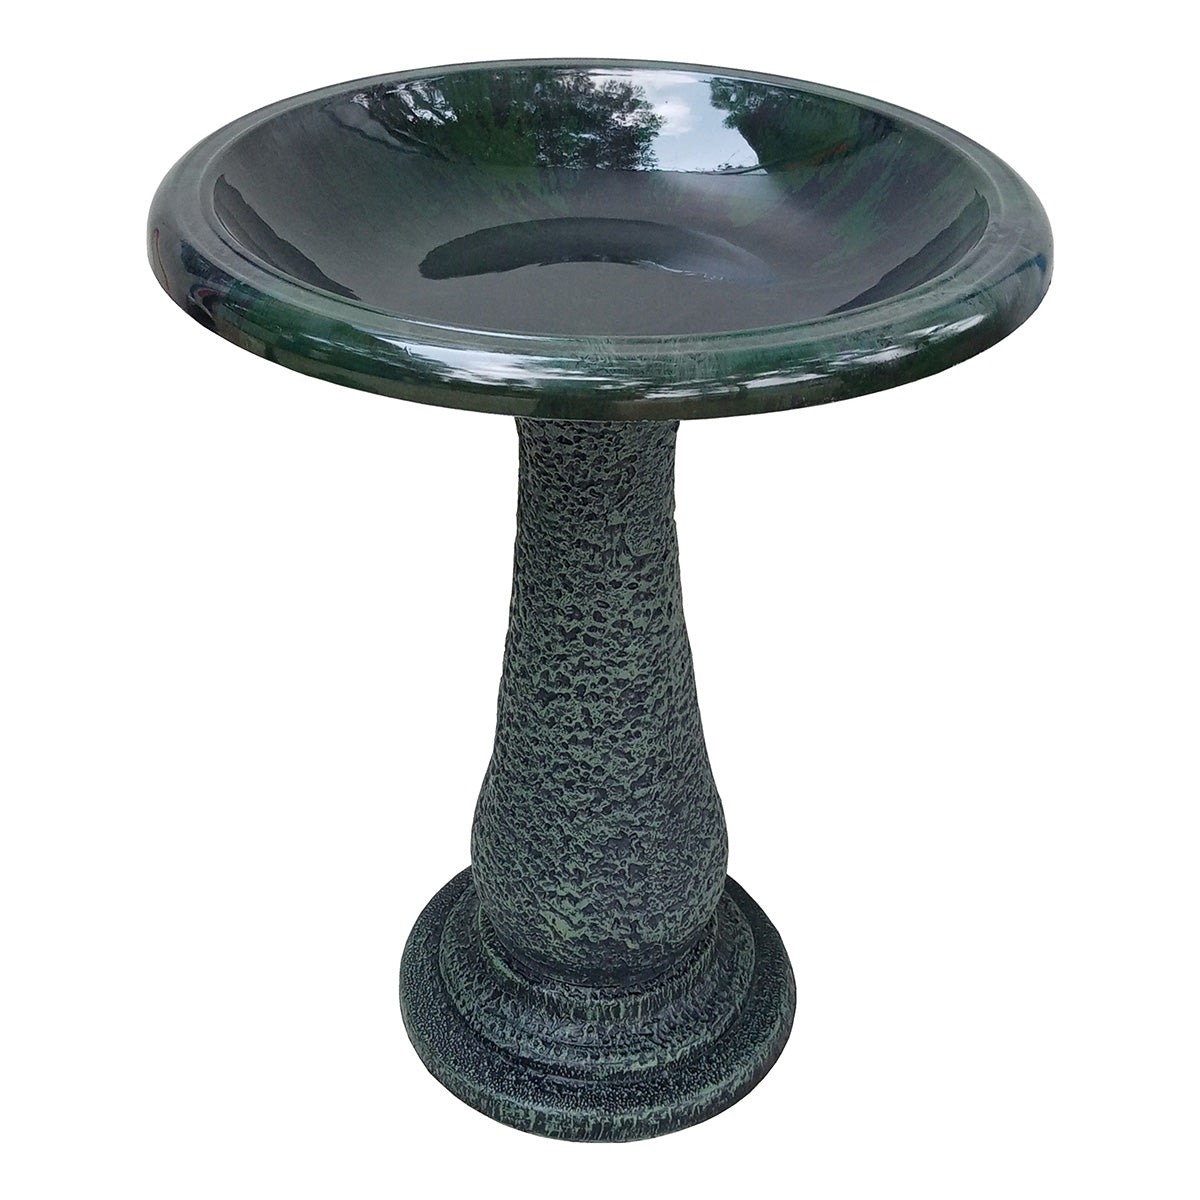 Hunter Green Fiber Clay Birdbath. Made of 70% clay, 25% plastic, and 5% fiber. Impact and shatter-resistant. UV protection. 19"D x 24"H 21"H base, 8 lbs.